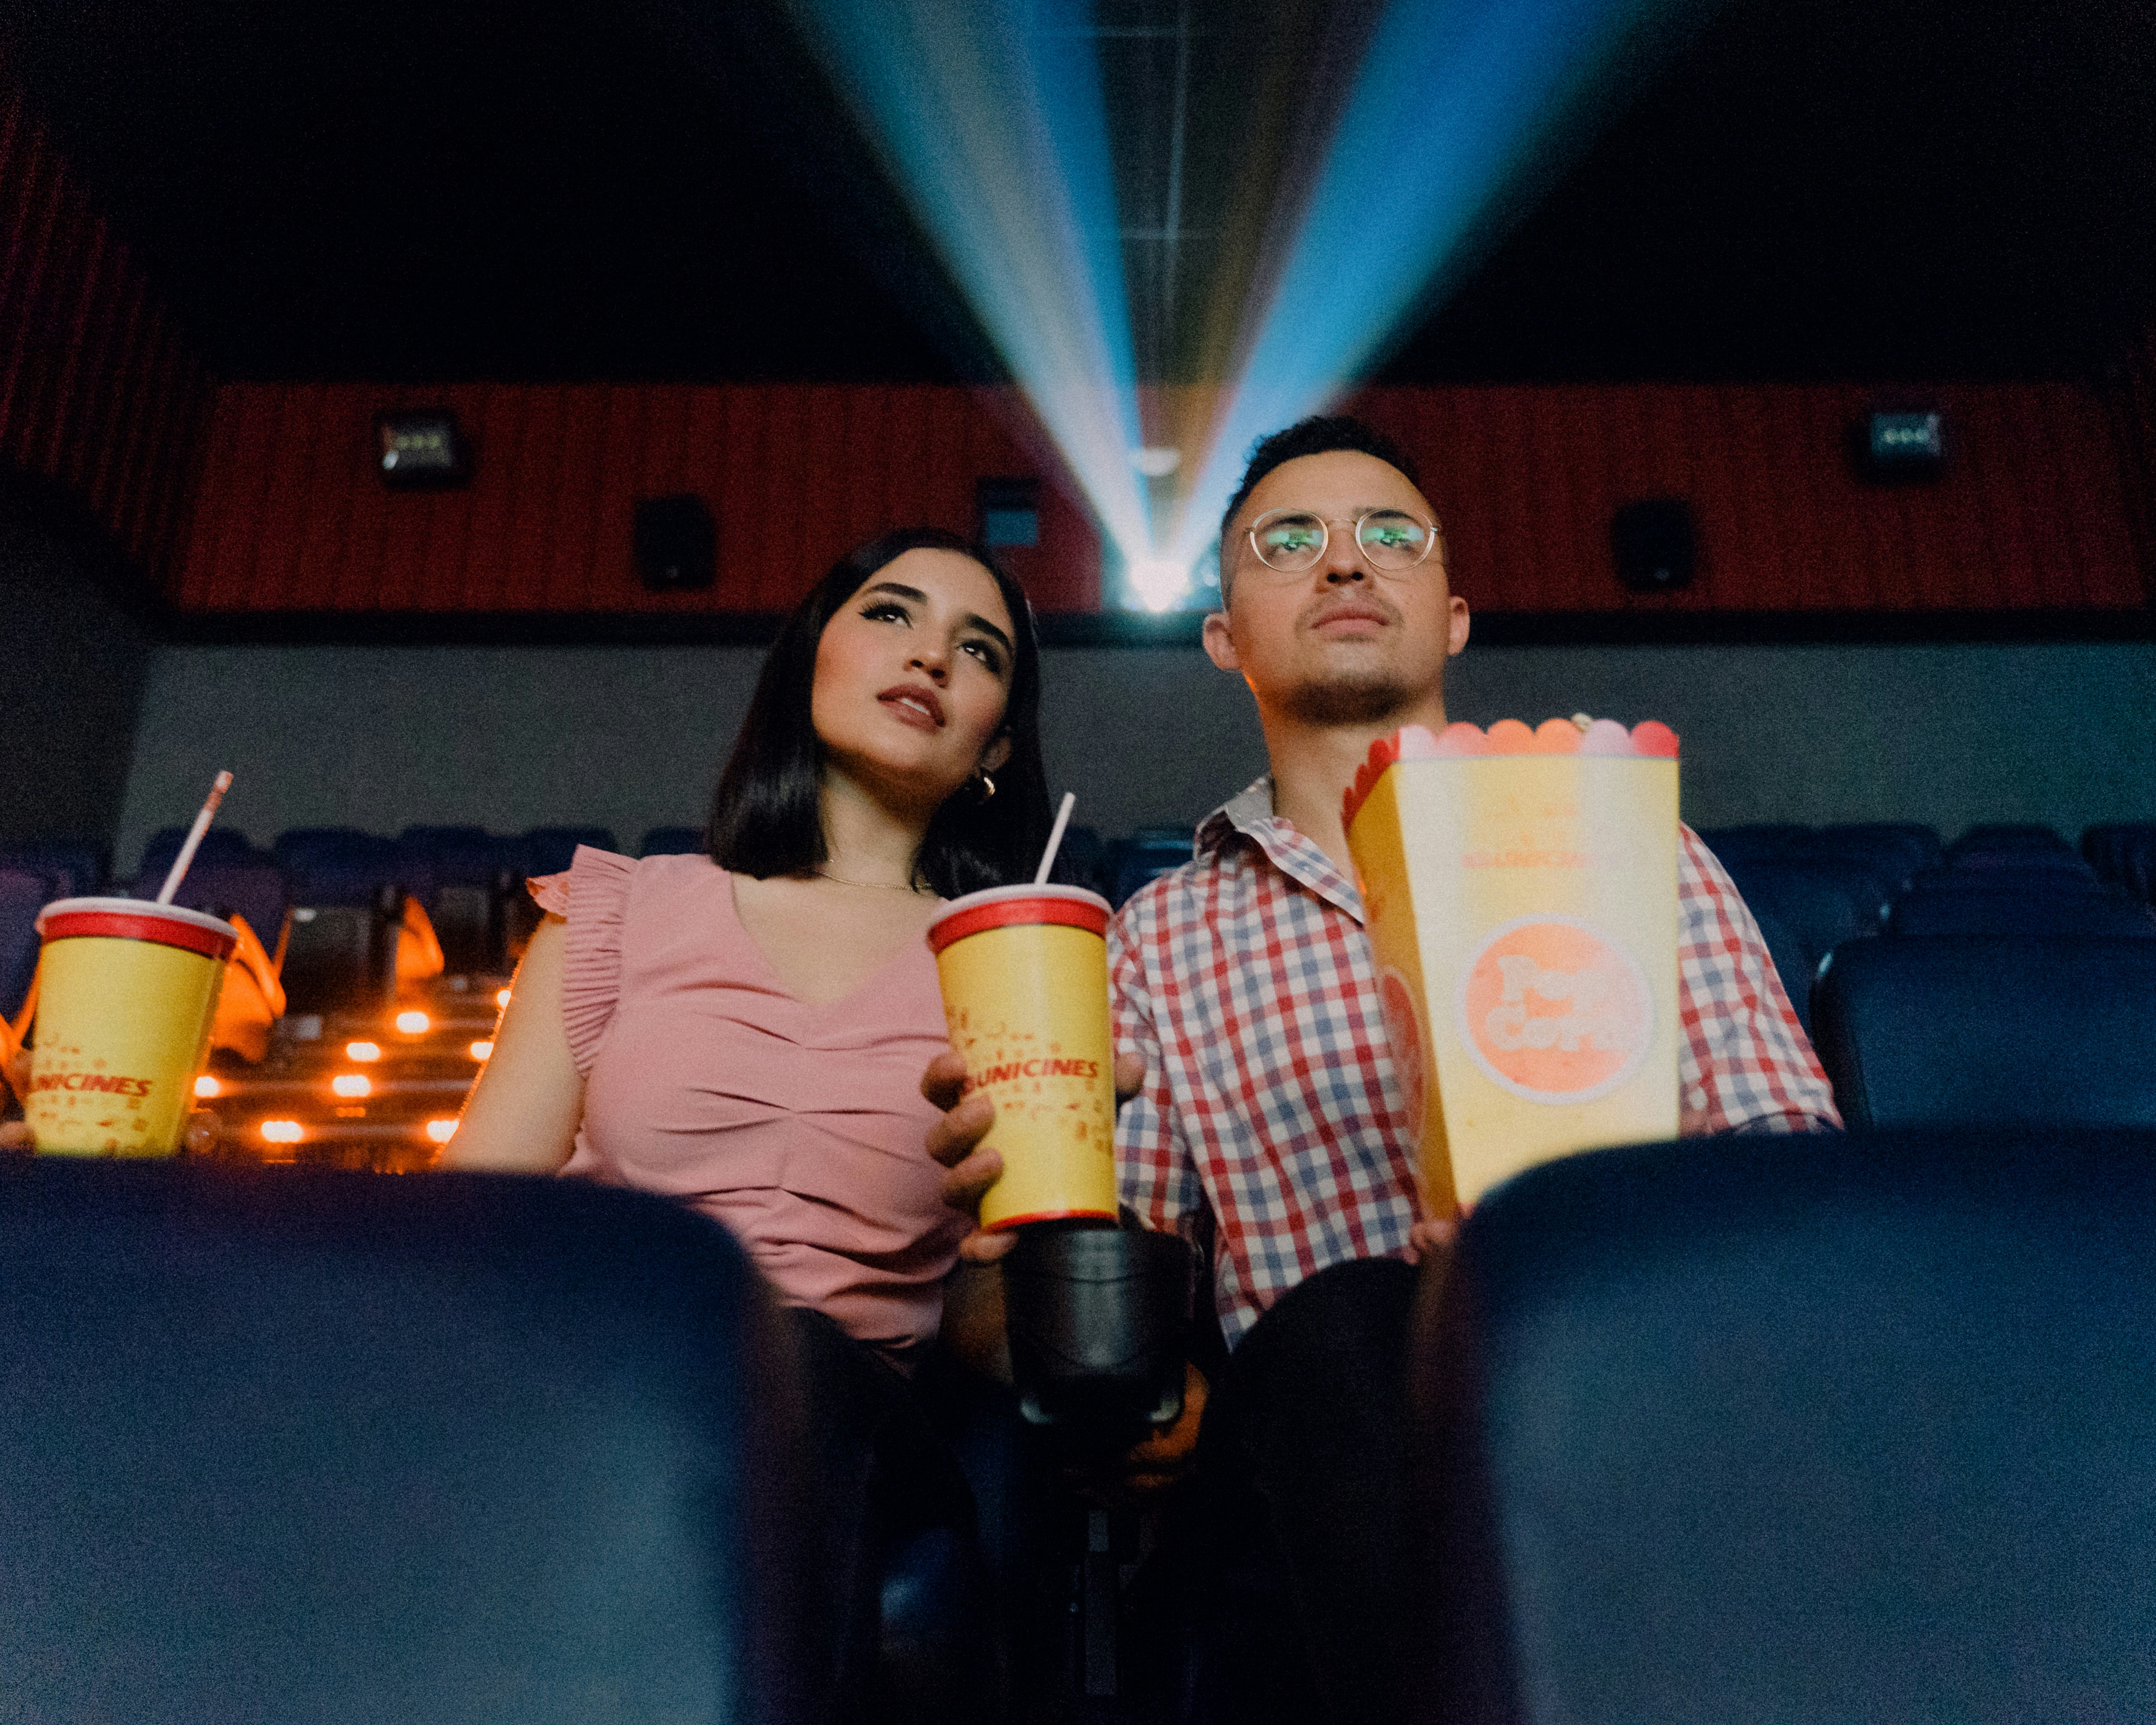 couple enjoying movie night experience at a theater